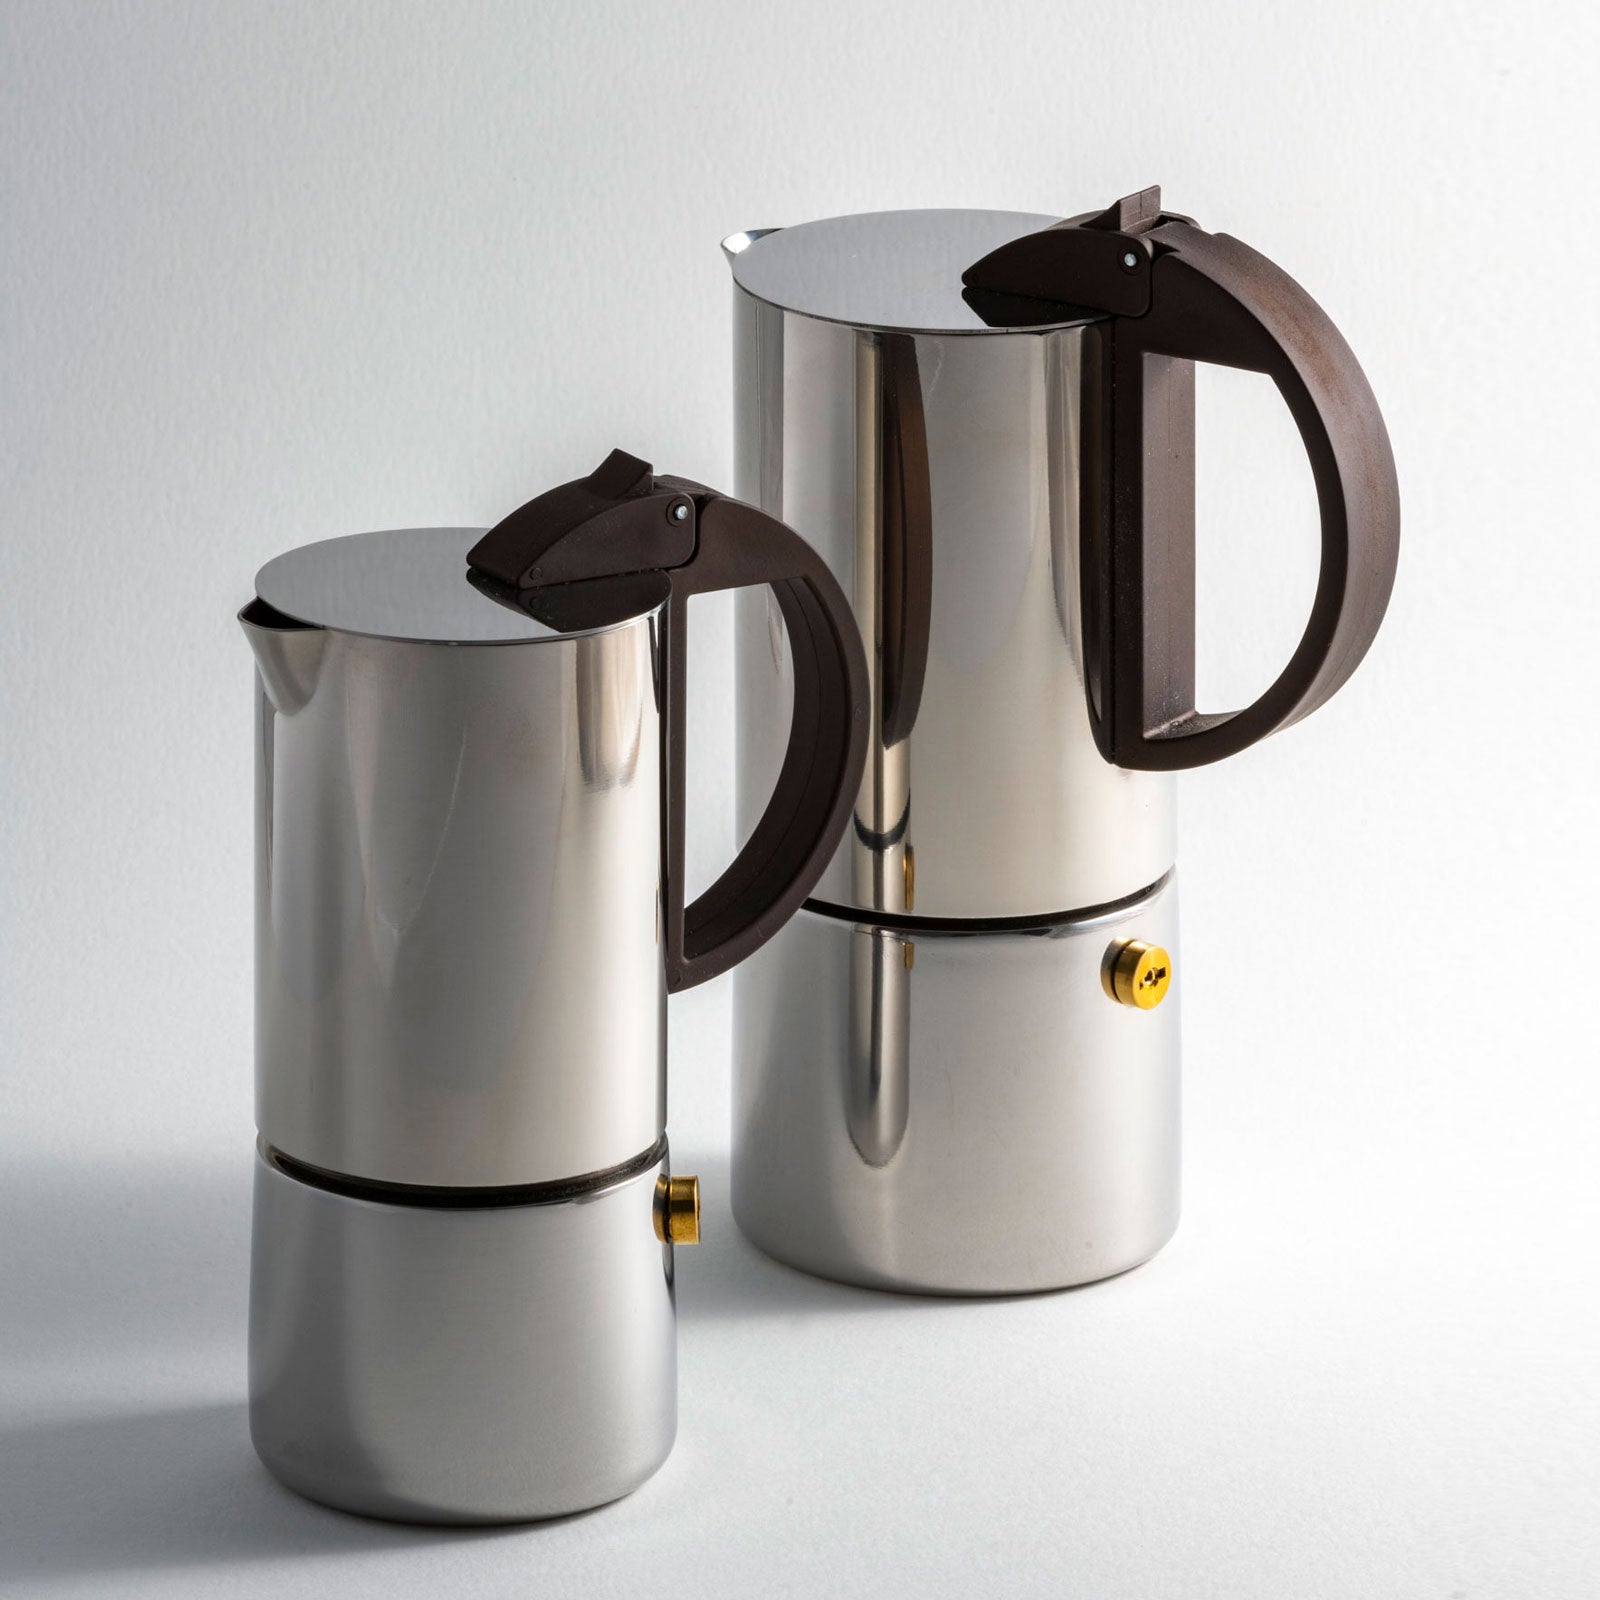 Chicca Coffee maker